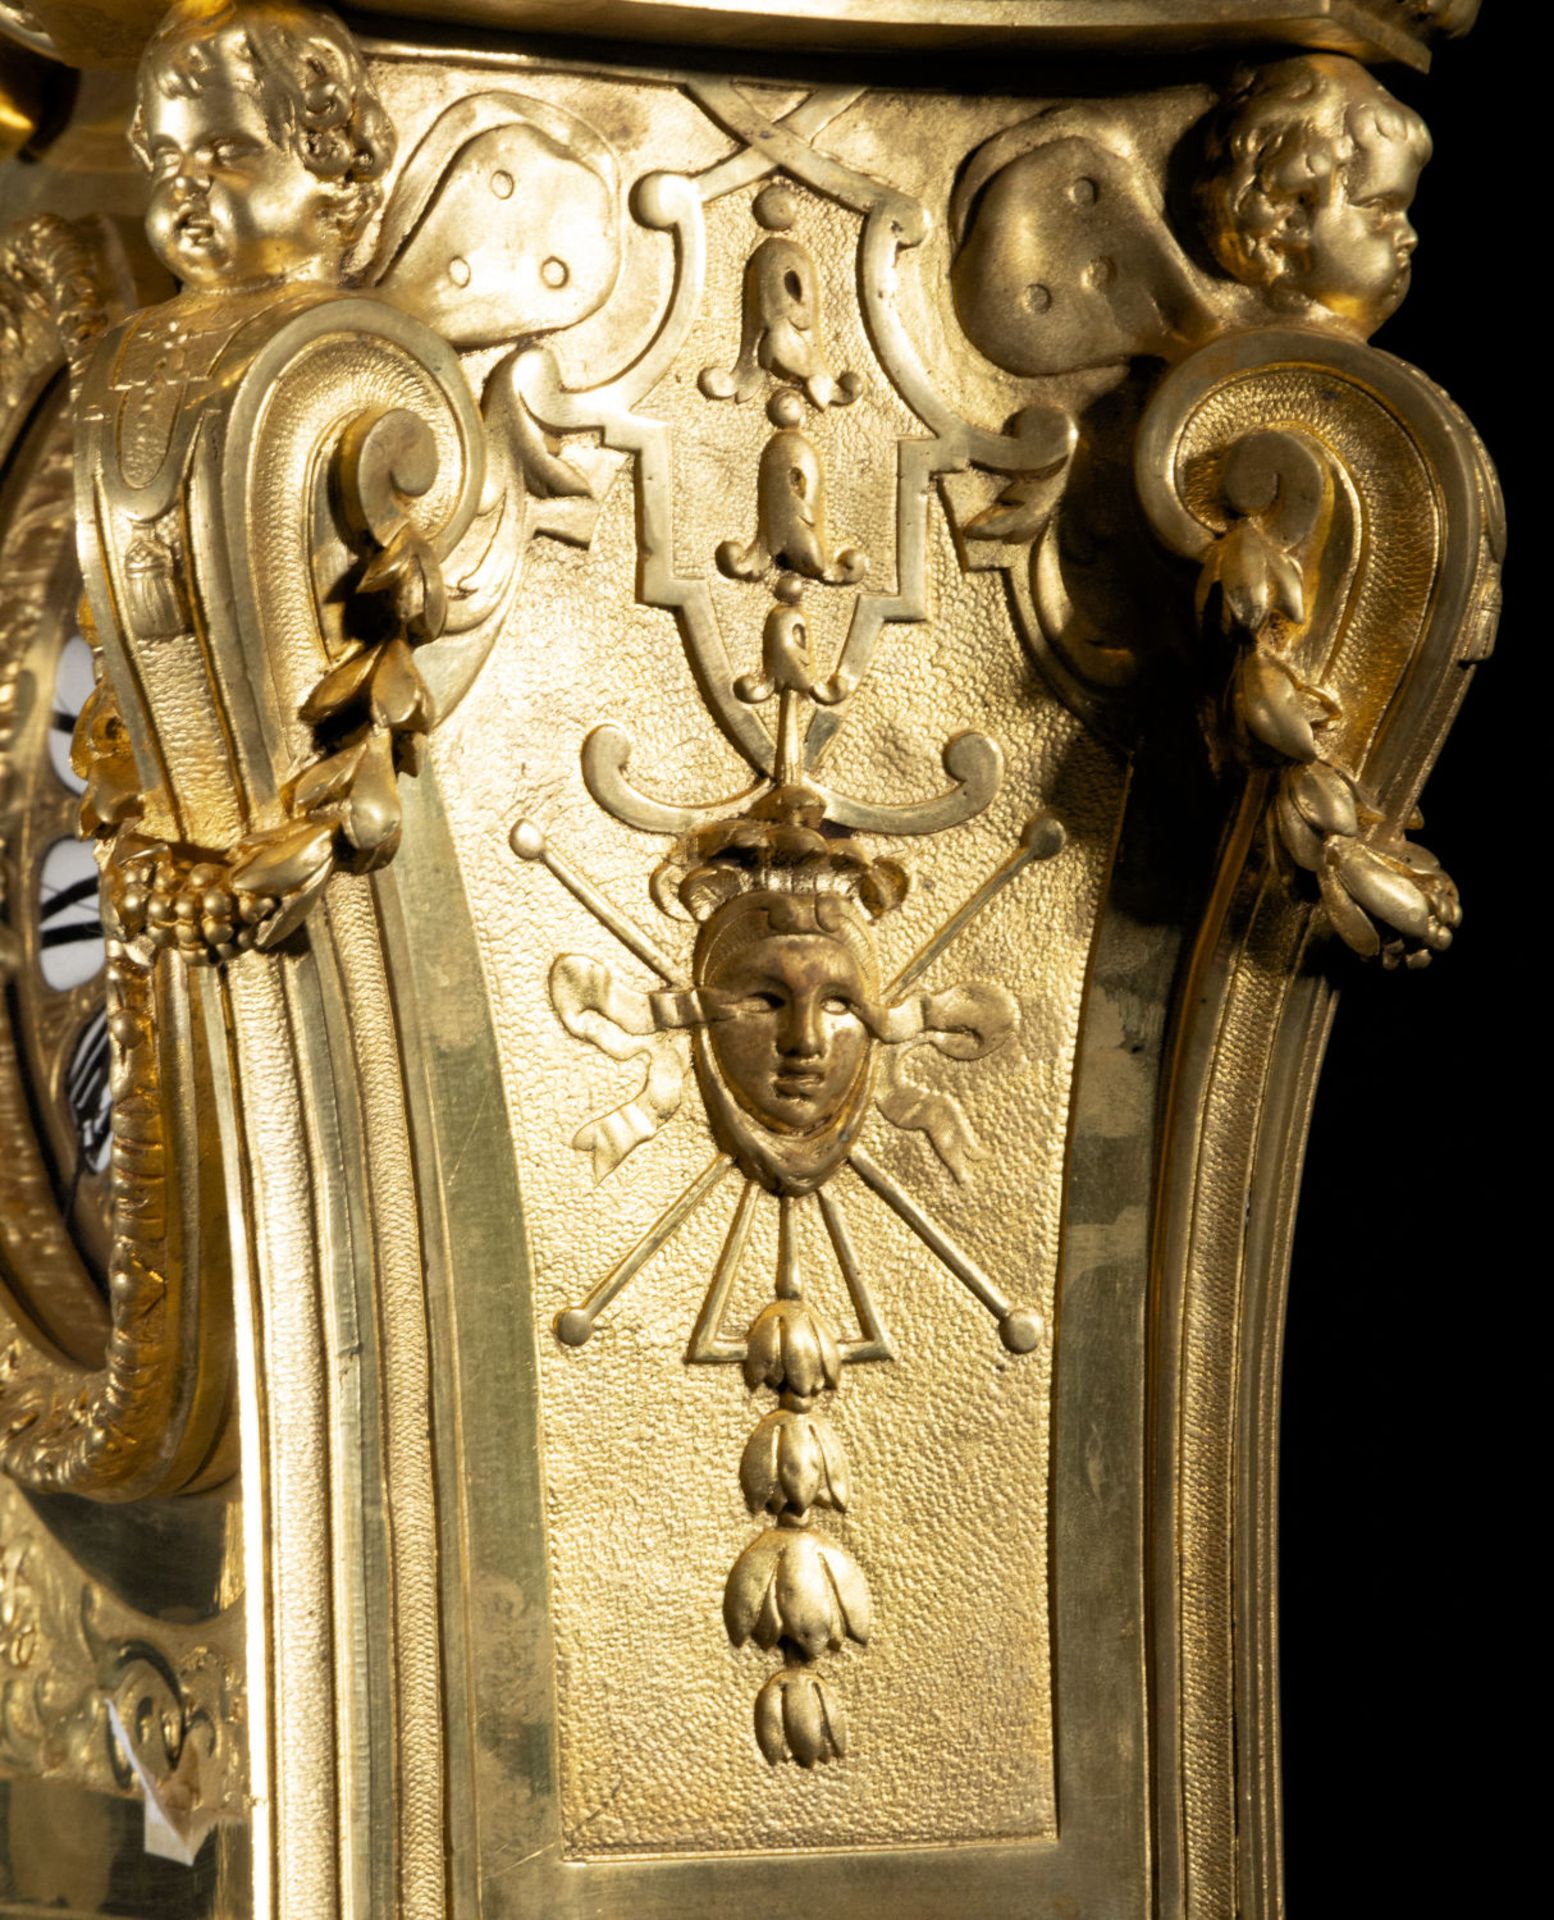 French Napoleon III Portico table clock in mercury gilded bronze from the 19th century - Image 4 of 6